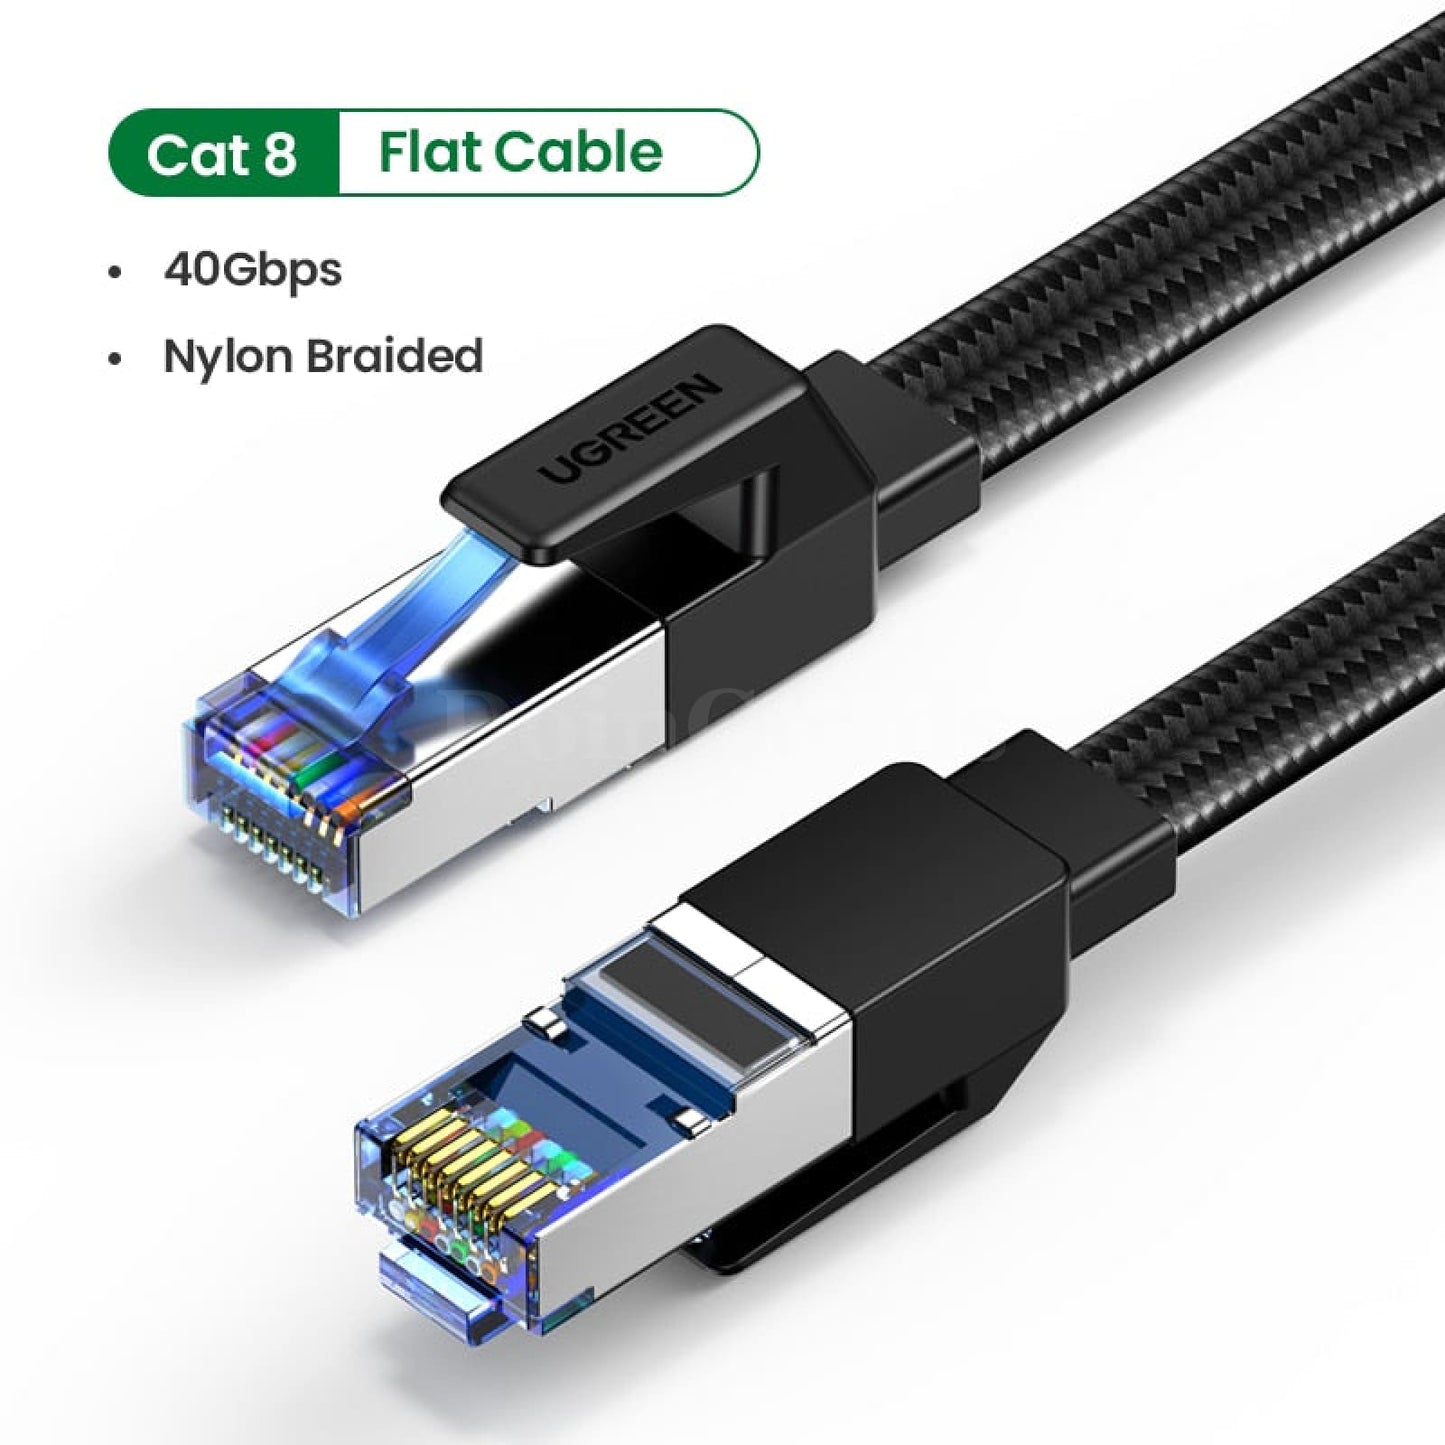 Ugreen Cat8 Ethernet Cable 40Gbps Rj45 Network For Ps4 Laptop Pc Router Cat 8 Nylon Black / 0.5M